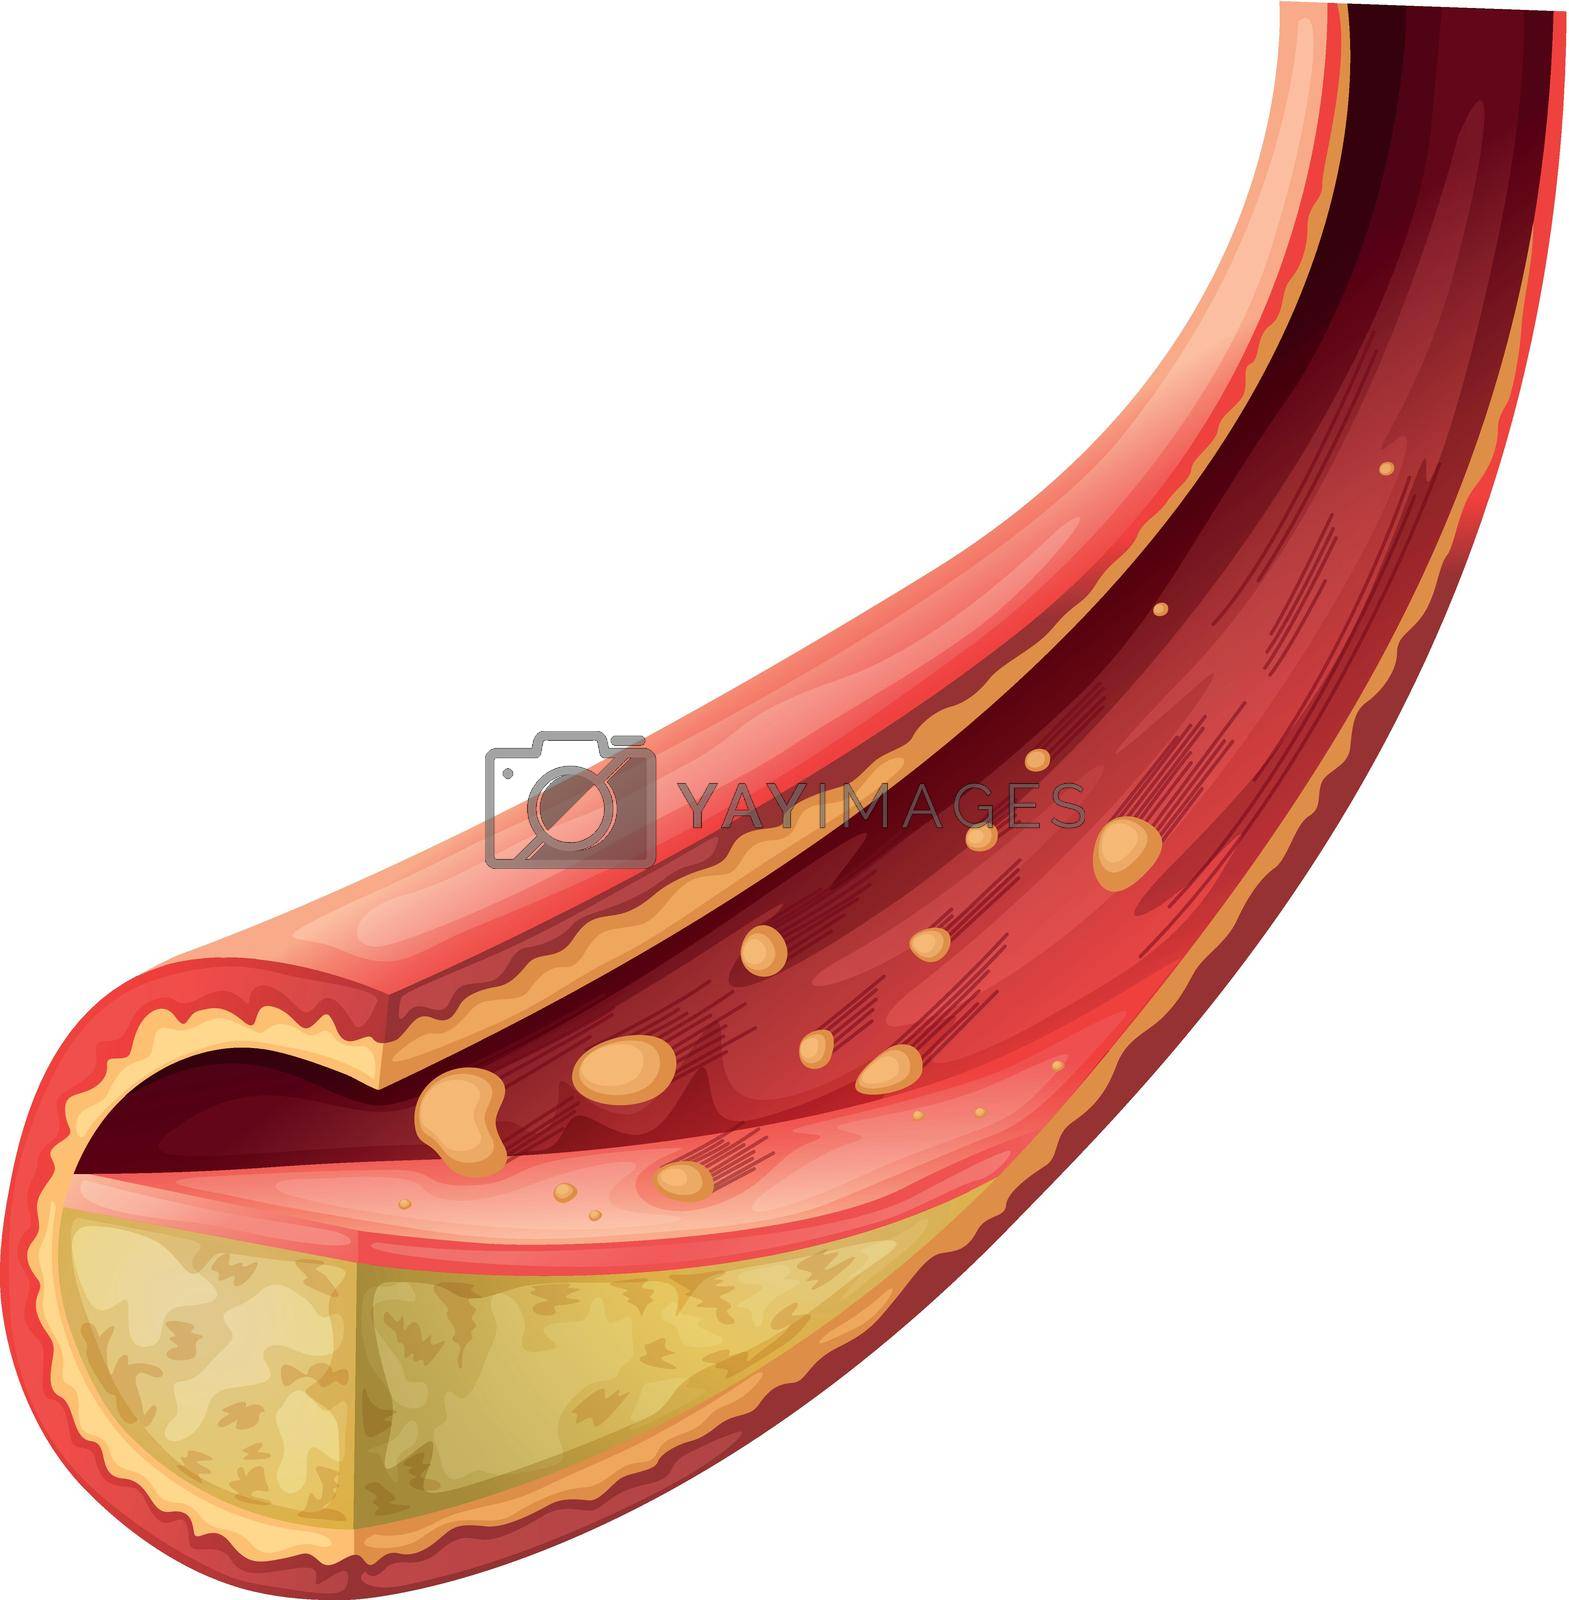 Royalty free image of Artery blocked with cholesterol by iimages